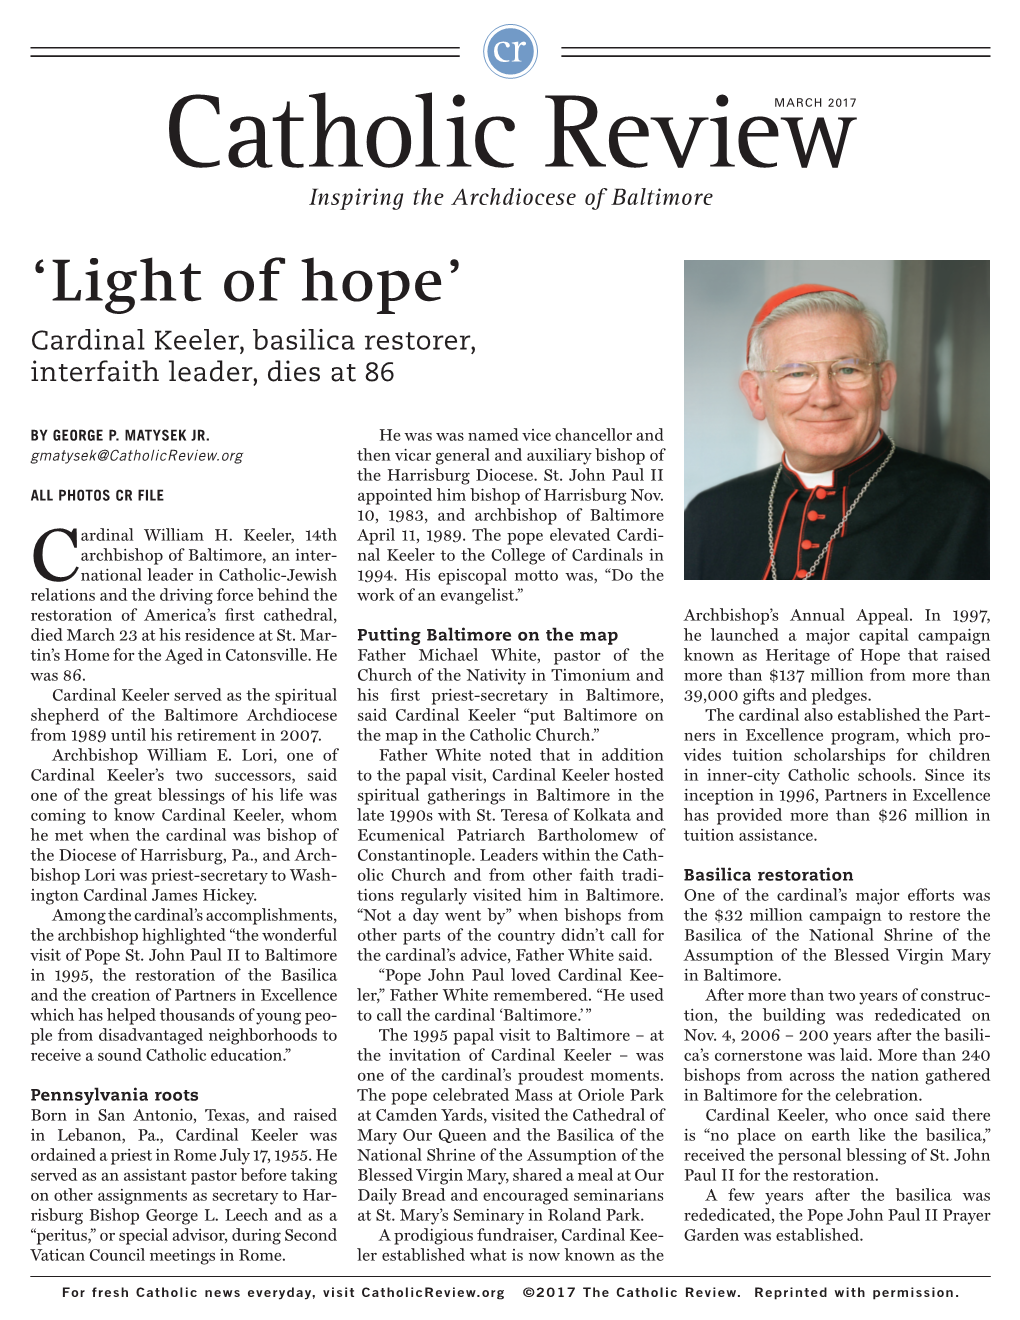 Catholic Reviewmarch 2017 Inspiring the Archdiocese of Baltimore ‘Light of Hope’ Cardinal Keeler, Basilica Restorer, Interfaith Leader, Dies at 86